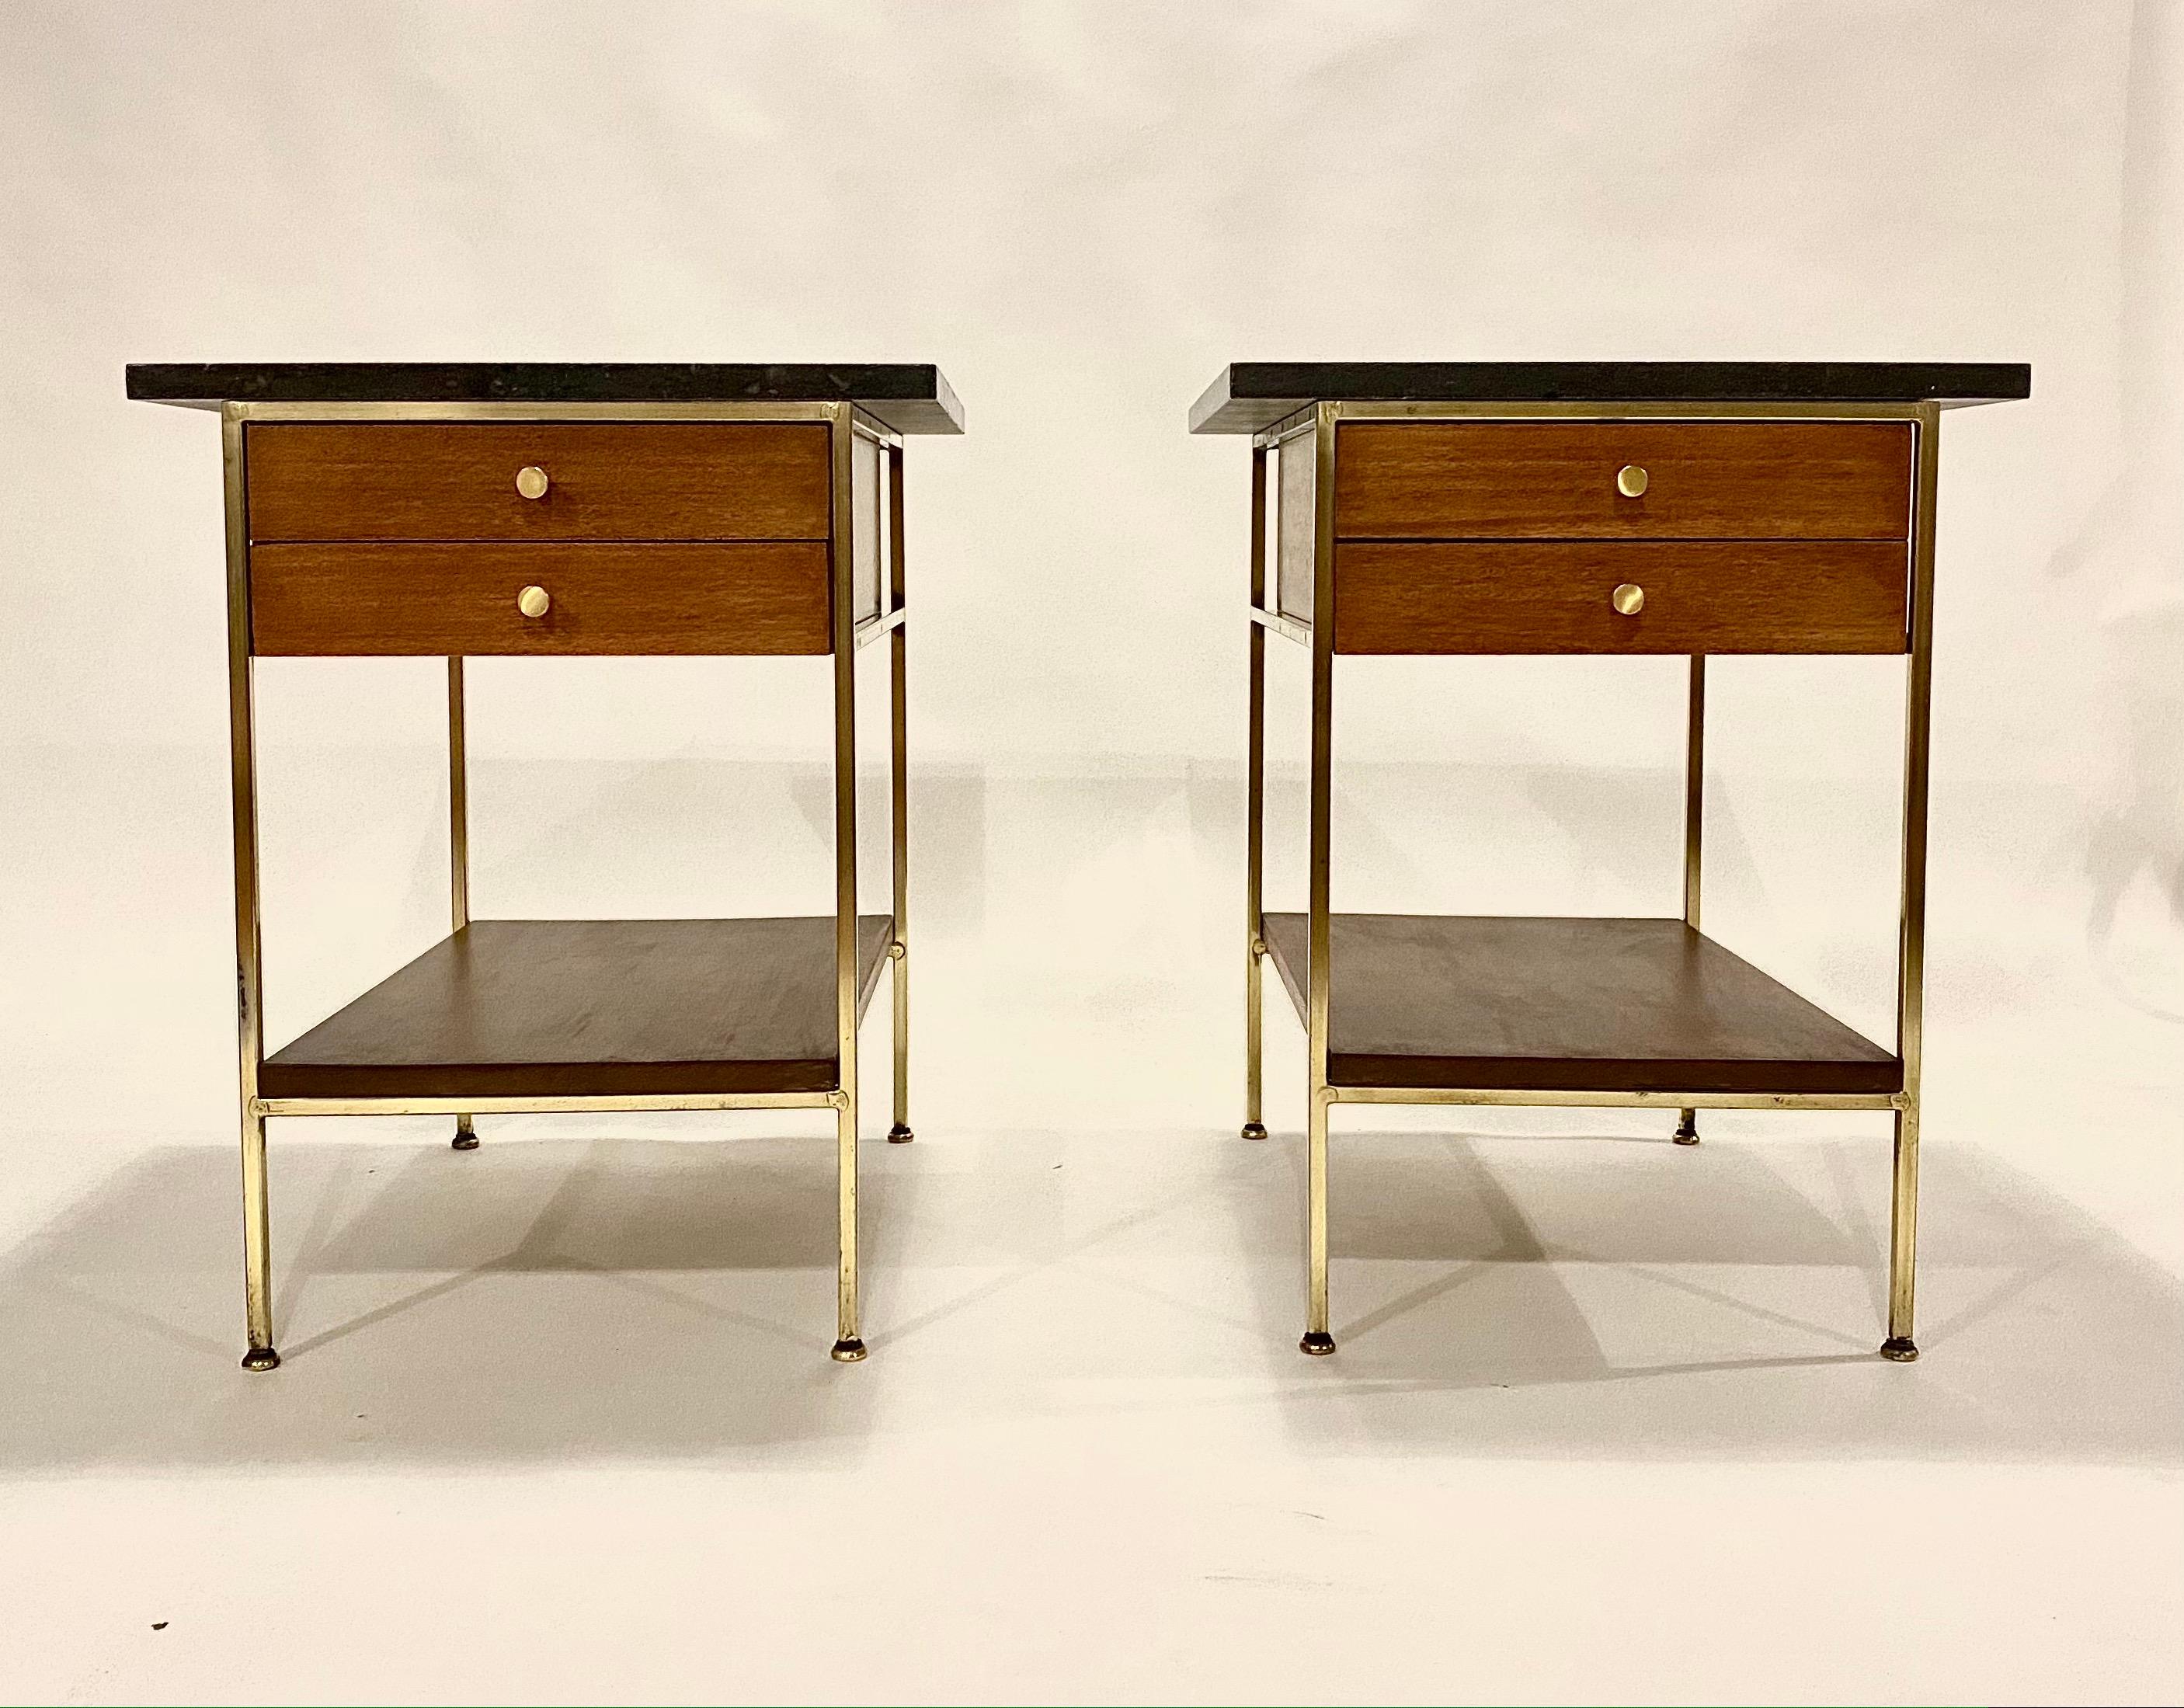 Pair of nightstands or end tables from the Irwin Collection designed by Paul McCobb for Calvin, Grand Rapids, 1950s. This set is all newly restored in hand polished brass and refinished walnut wood, original gray stone tops and replaced brass pulls.